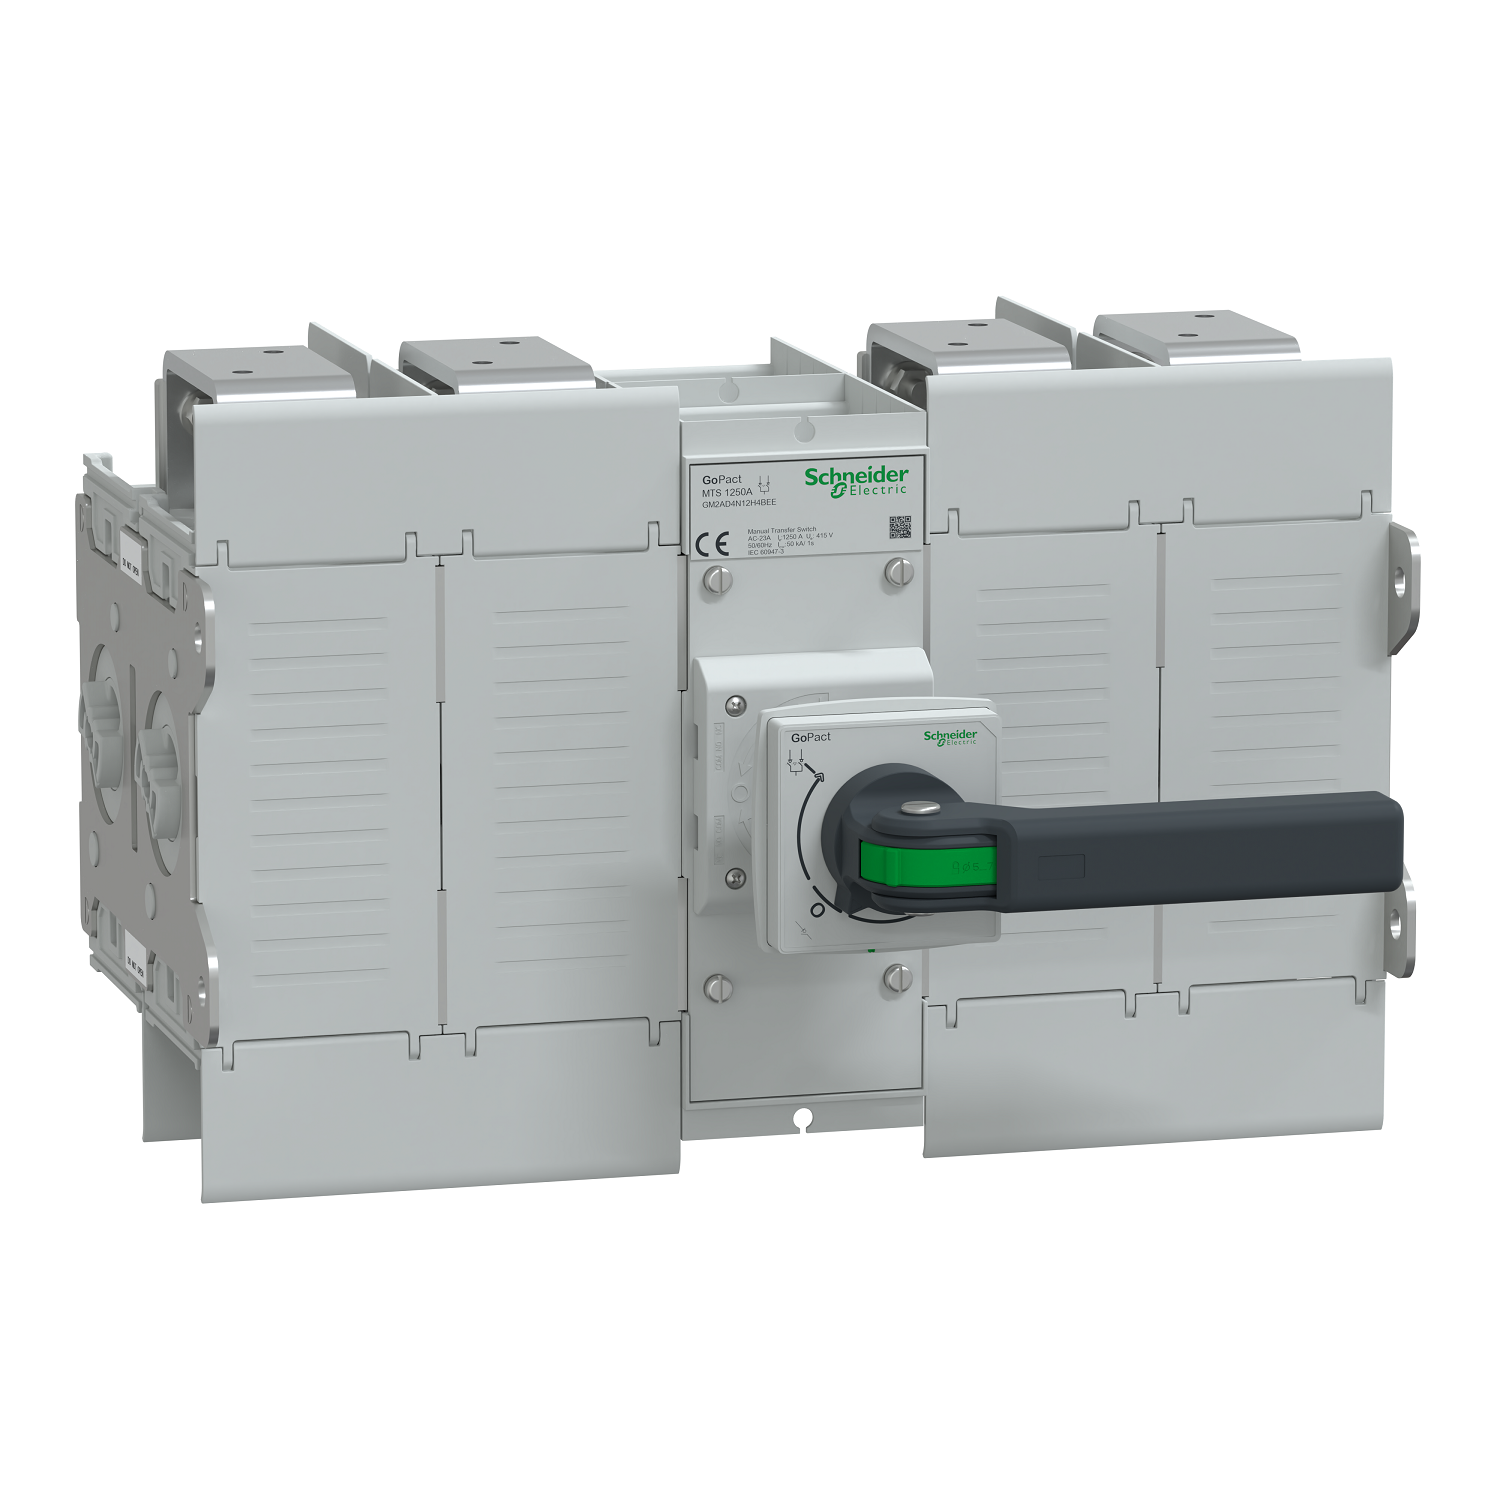 Manual transfer switch, GoPact MTS 200, 4 poles, 125A, 415VAC 50/60Hz, extended rotary handle, open transition